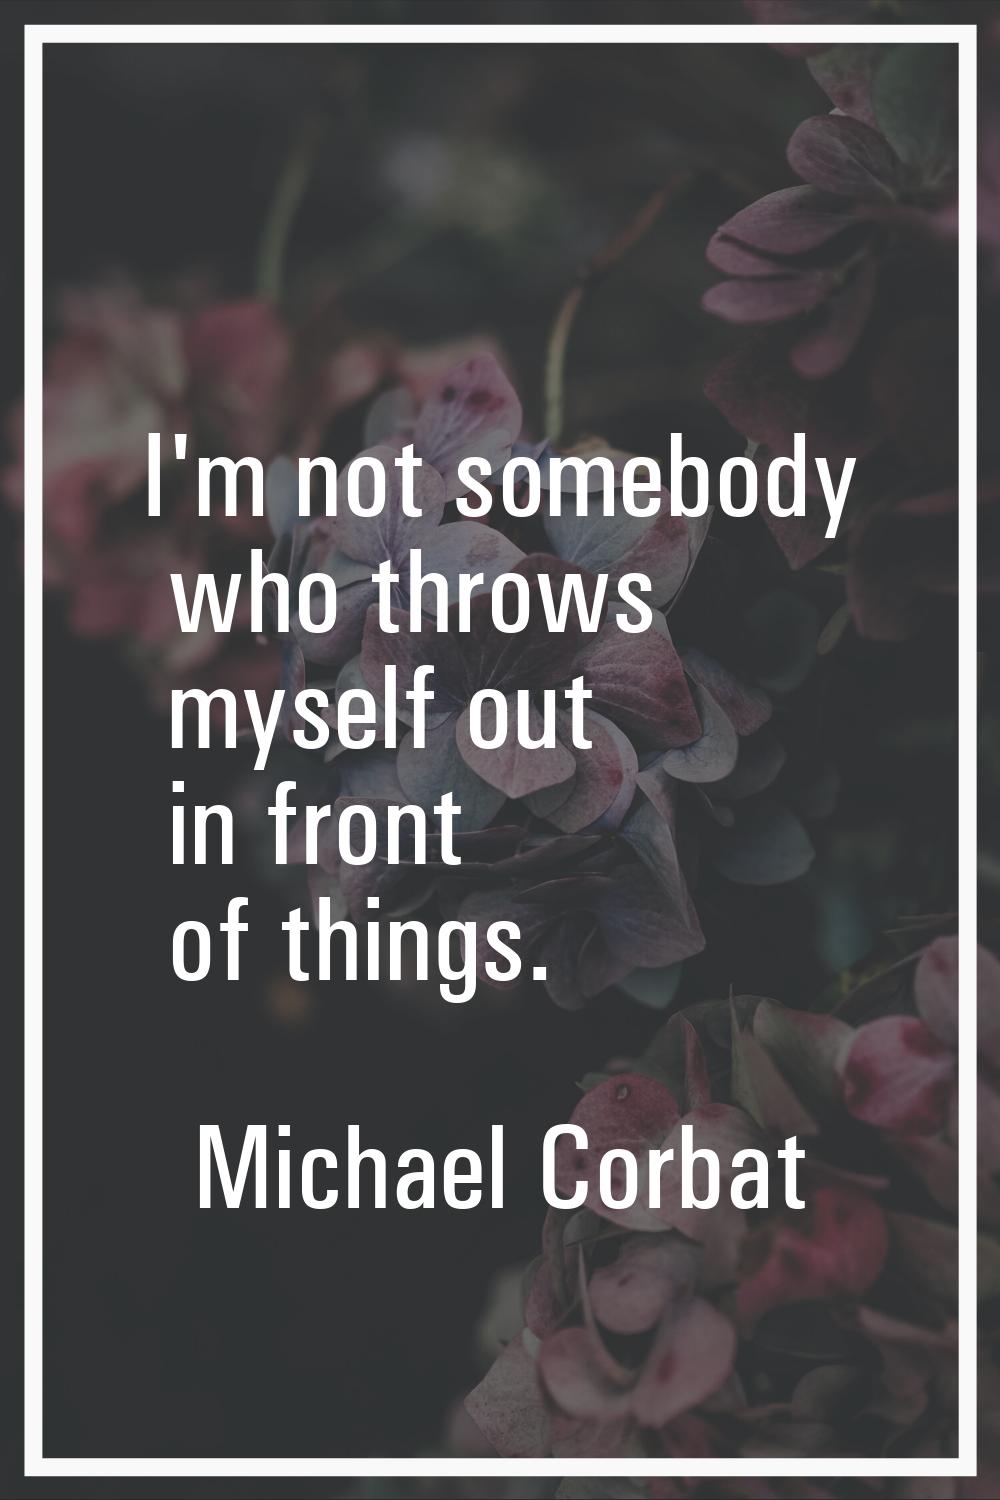 I'm not somebody who throws myself out in front of things.